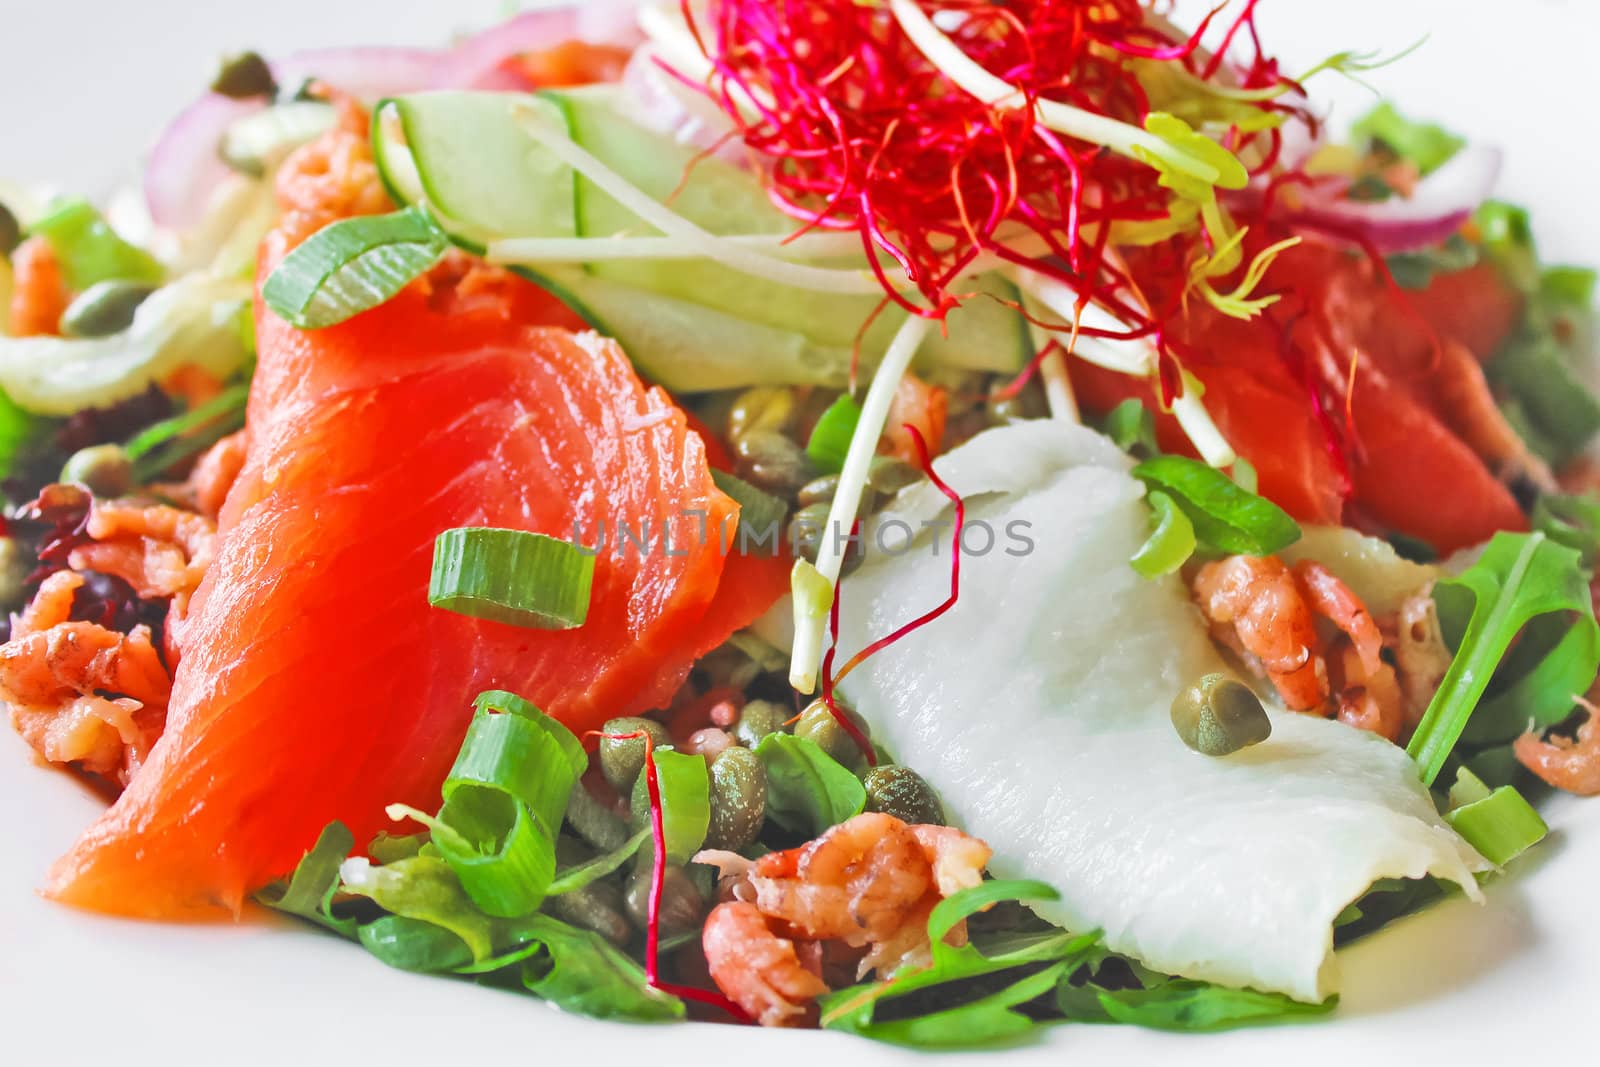 Salad with red and white fish, shrimp and herbs by NickNick